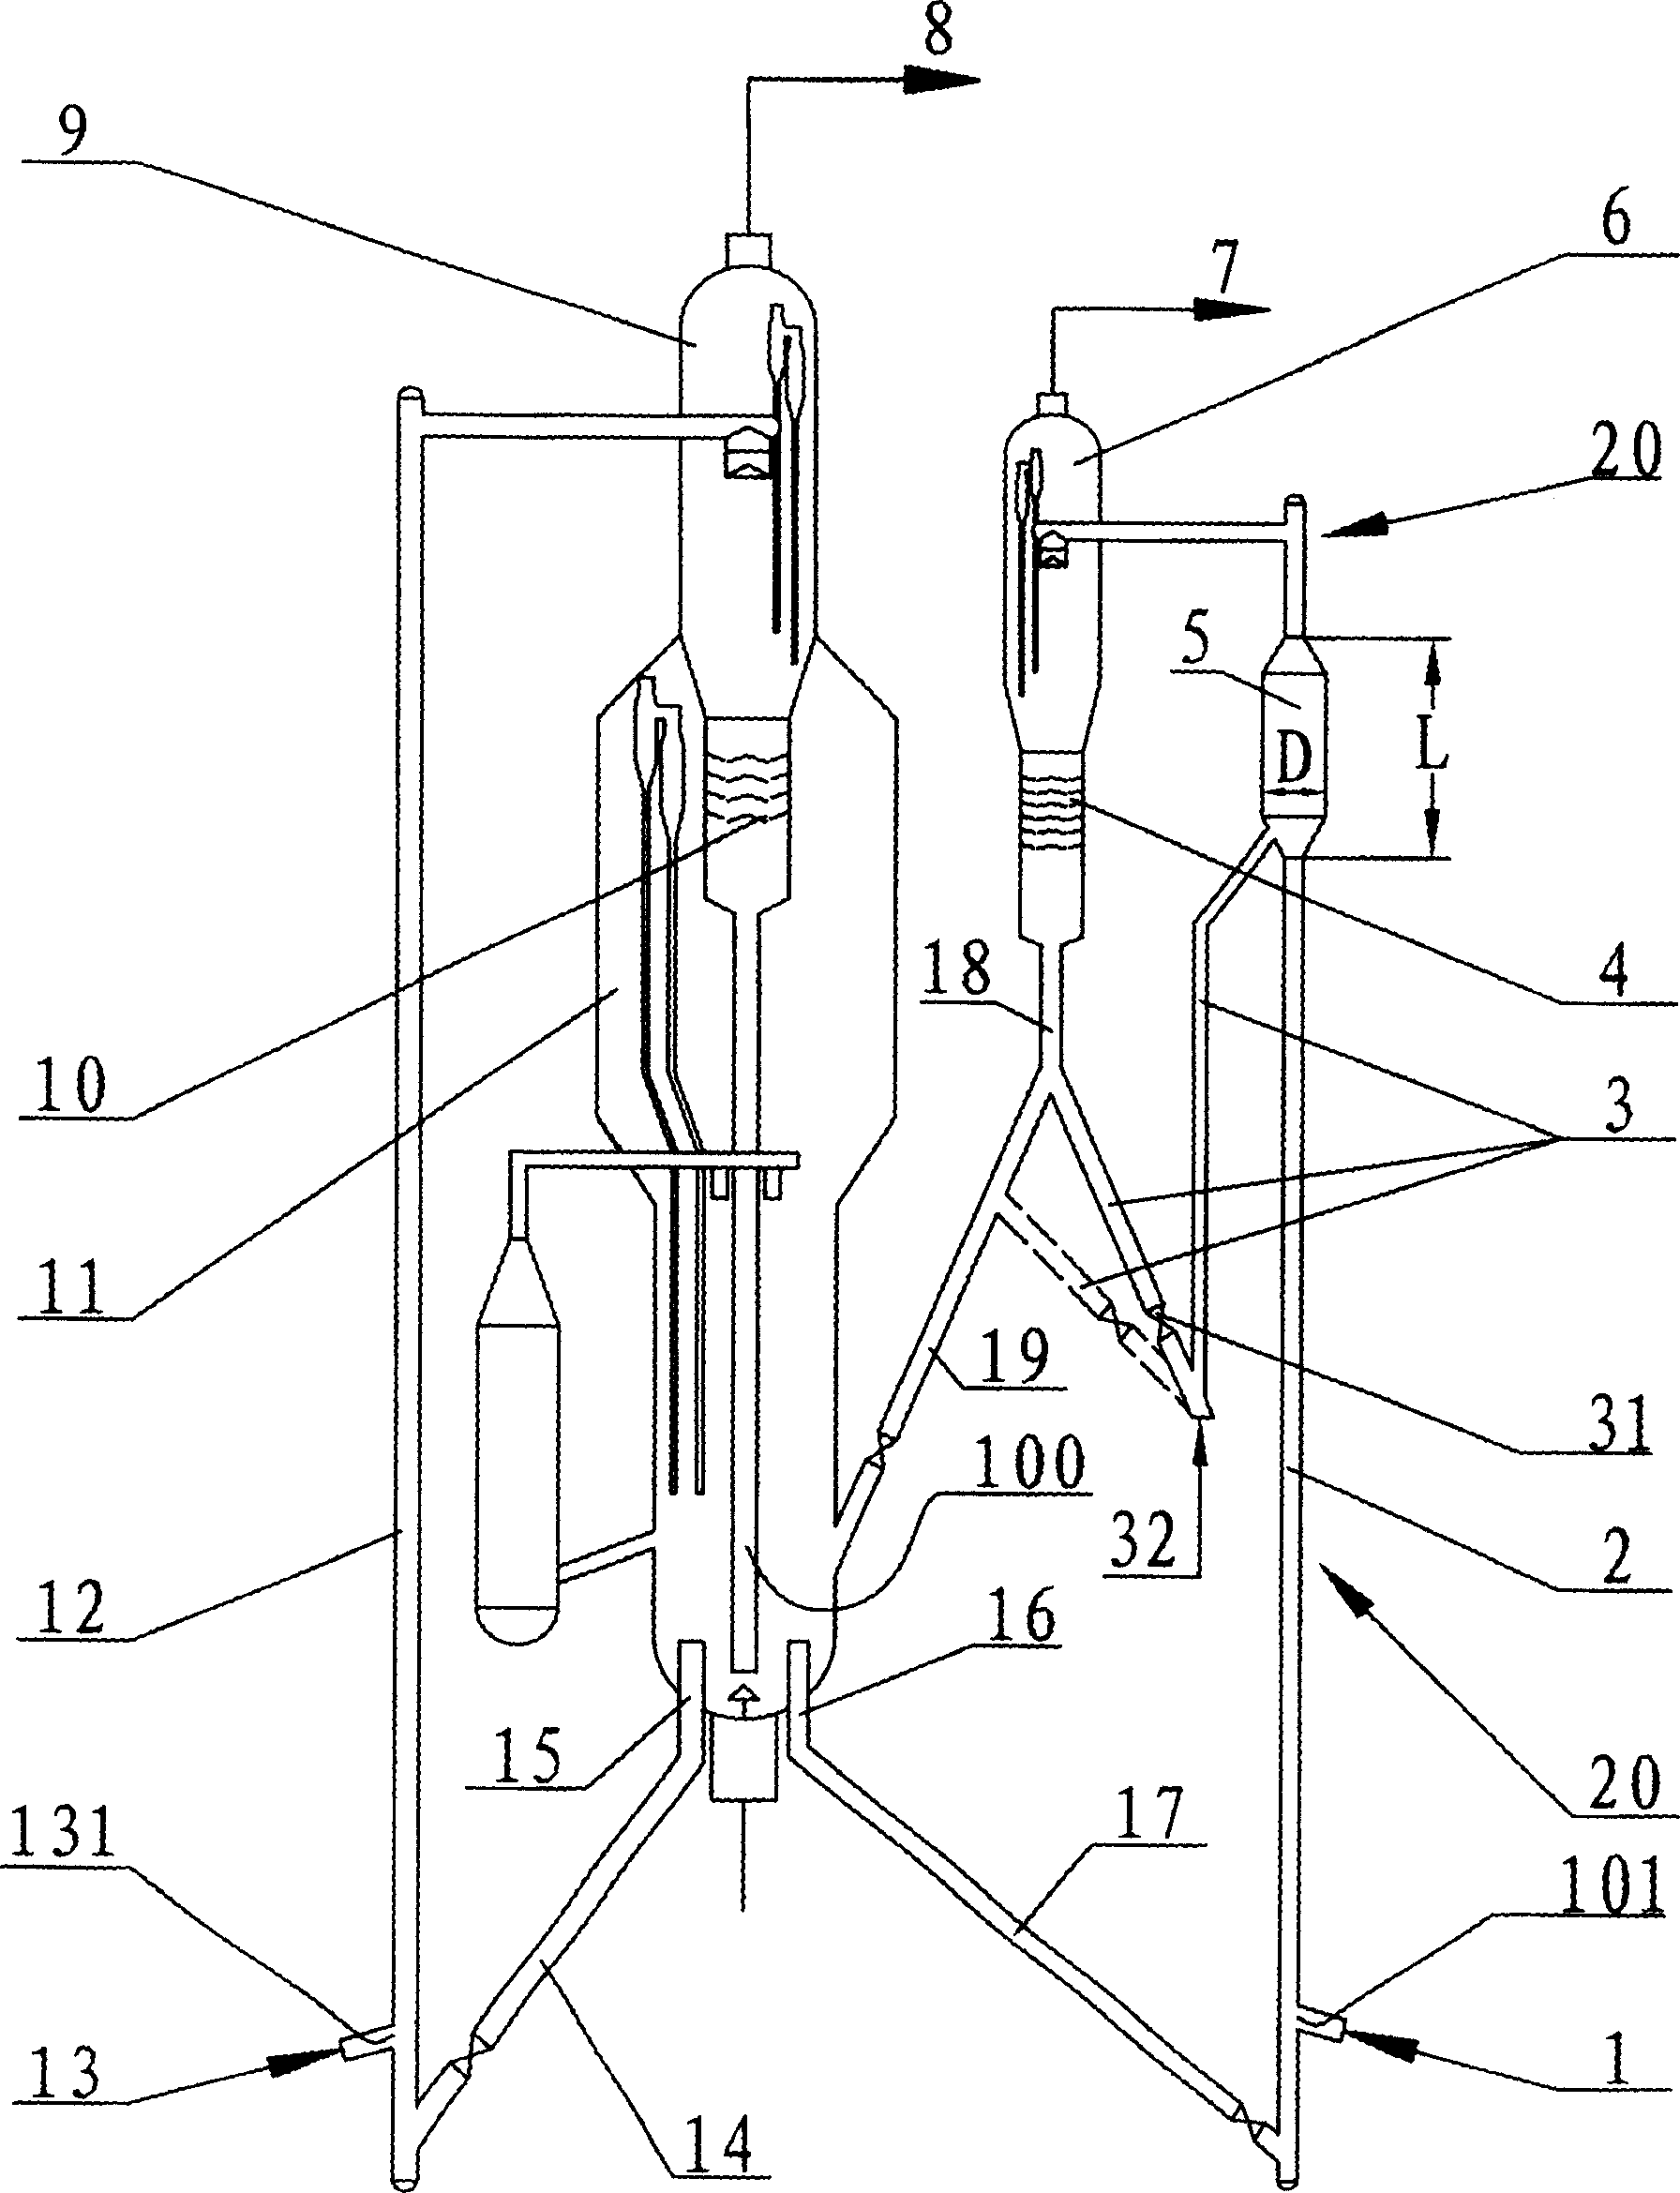 Double lift pipe catalytic cracking method and device for modifying inferior patrol